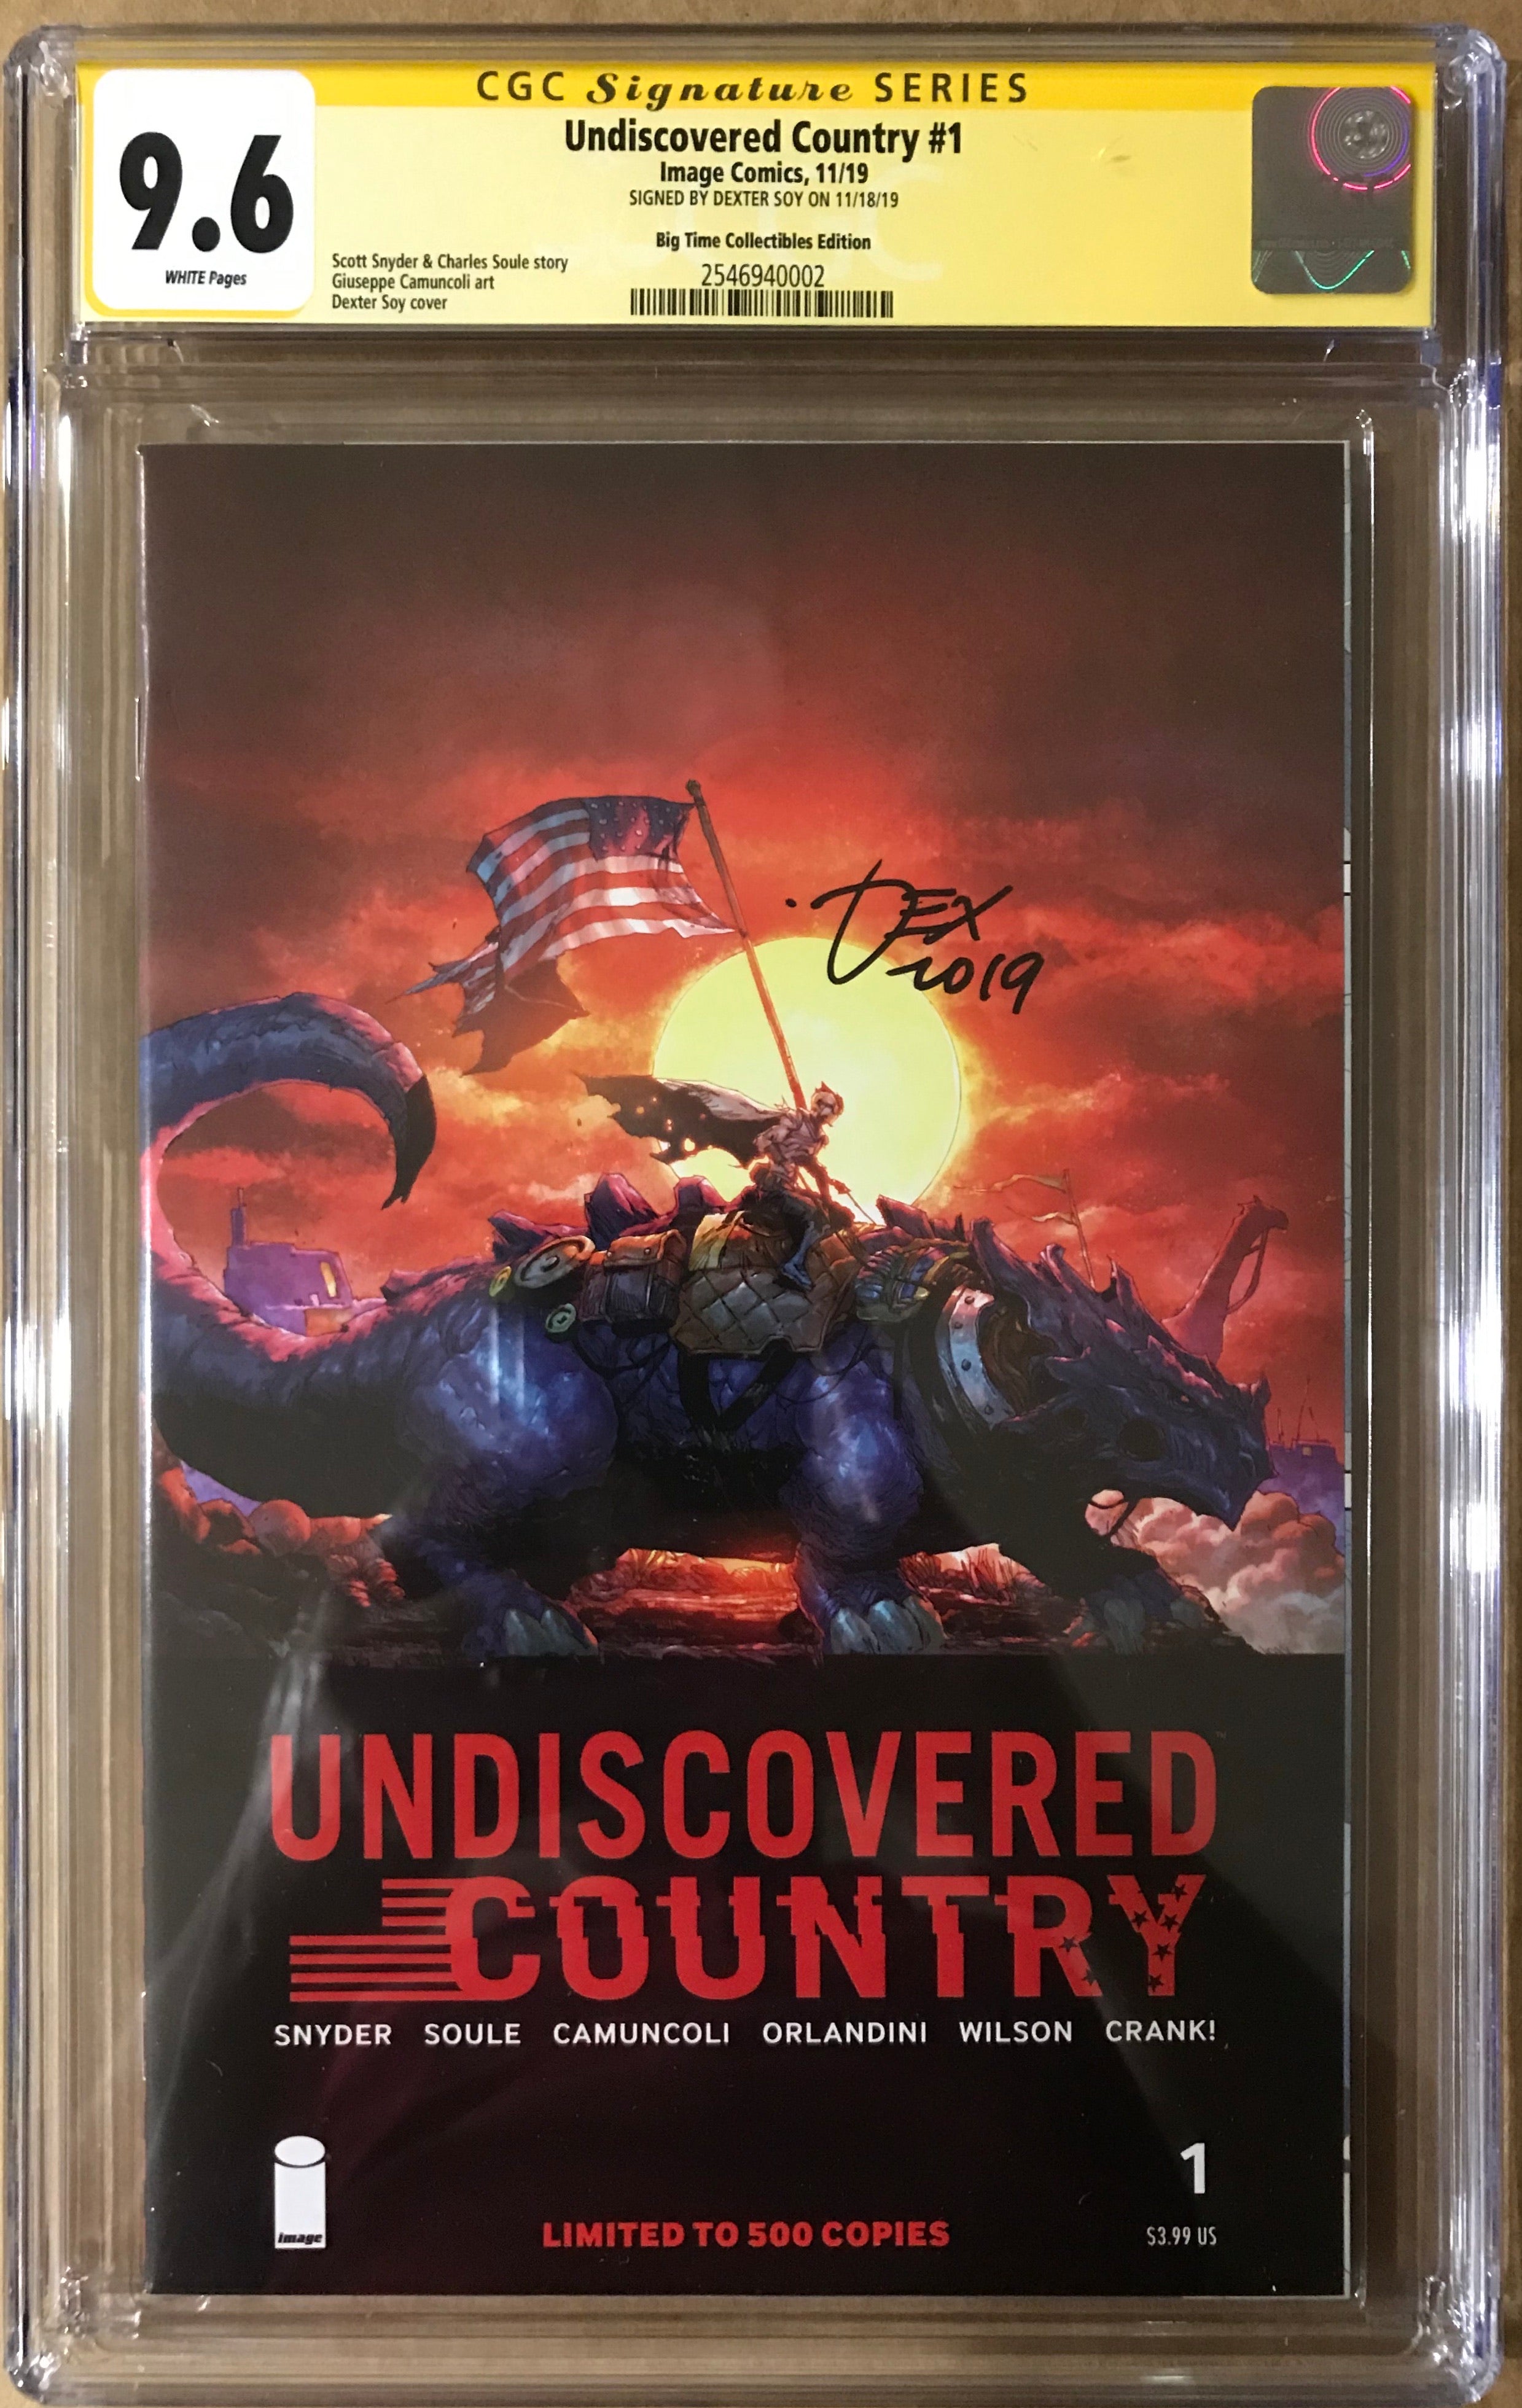 UNDISCOVERED COUNTRY #1 DEXTER SOY EXCLUSIVE CGC 9.6 SIGNED BY DEXTER SOY